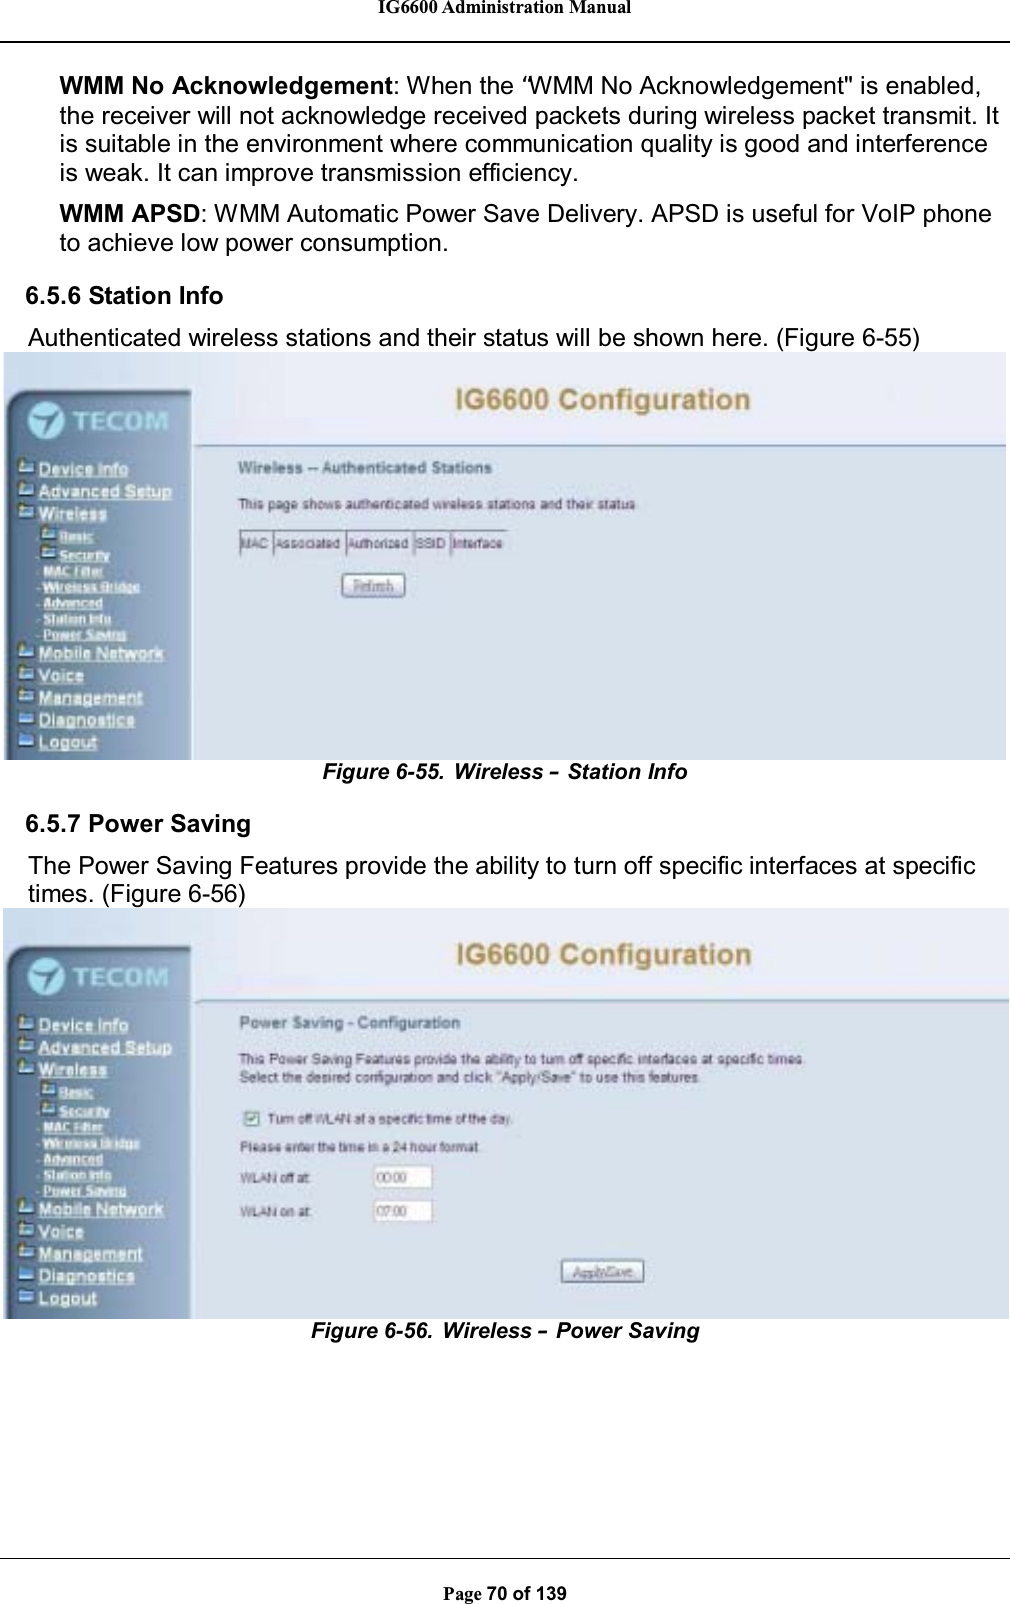 IG6600 Administration ManualPage 70 of 139WMM No Acknowledgement: When the “WMM No Acknowledgement&quot; is enabled,the receiver will not acknowledge received packets during wireless packet transmit. It is suitable in the environment where communication quality is good and interferenceis weak. It can improve transmission efficiency.WMM APSD: WMM Automatic Power Save Delivery. APSD is useful for VoIP phoneto achieve low power consumption.6.5.6 Station InfoAuthenticated wireless stations and their status will be shown here. (Figure 6-55)Figure 6-55. Wireless –Station Info6.5.7 Power SavingThe Power Saving Features provide the ability to turn off specific interfaces at specifictimes. (Figure 6-56)Figure 6-56. Wireless –Power Saving